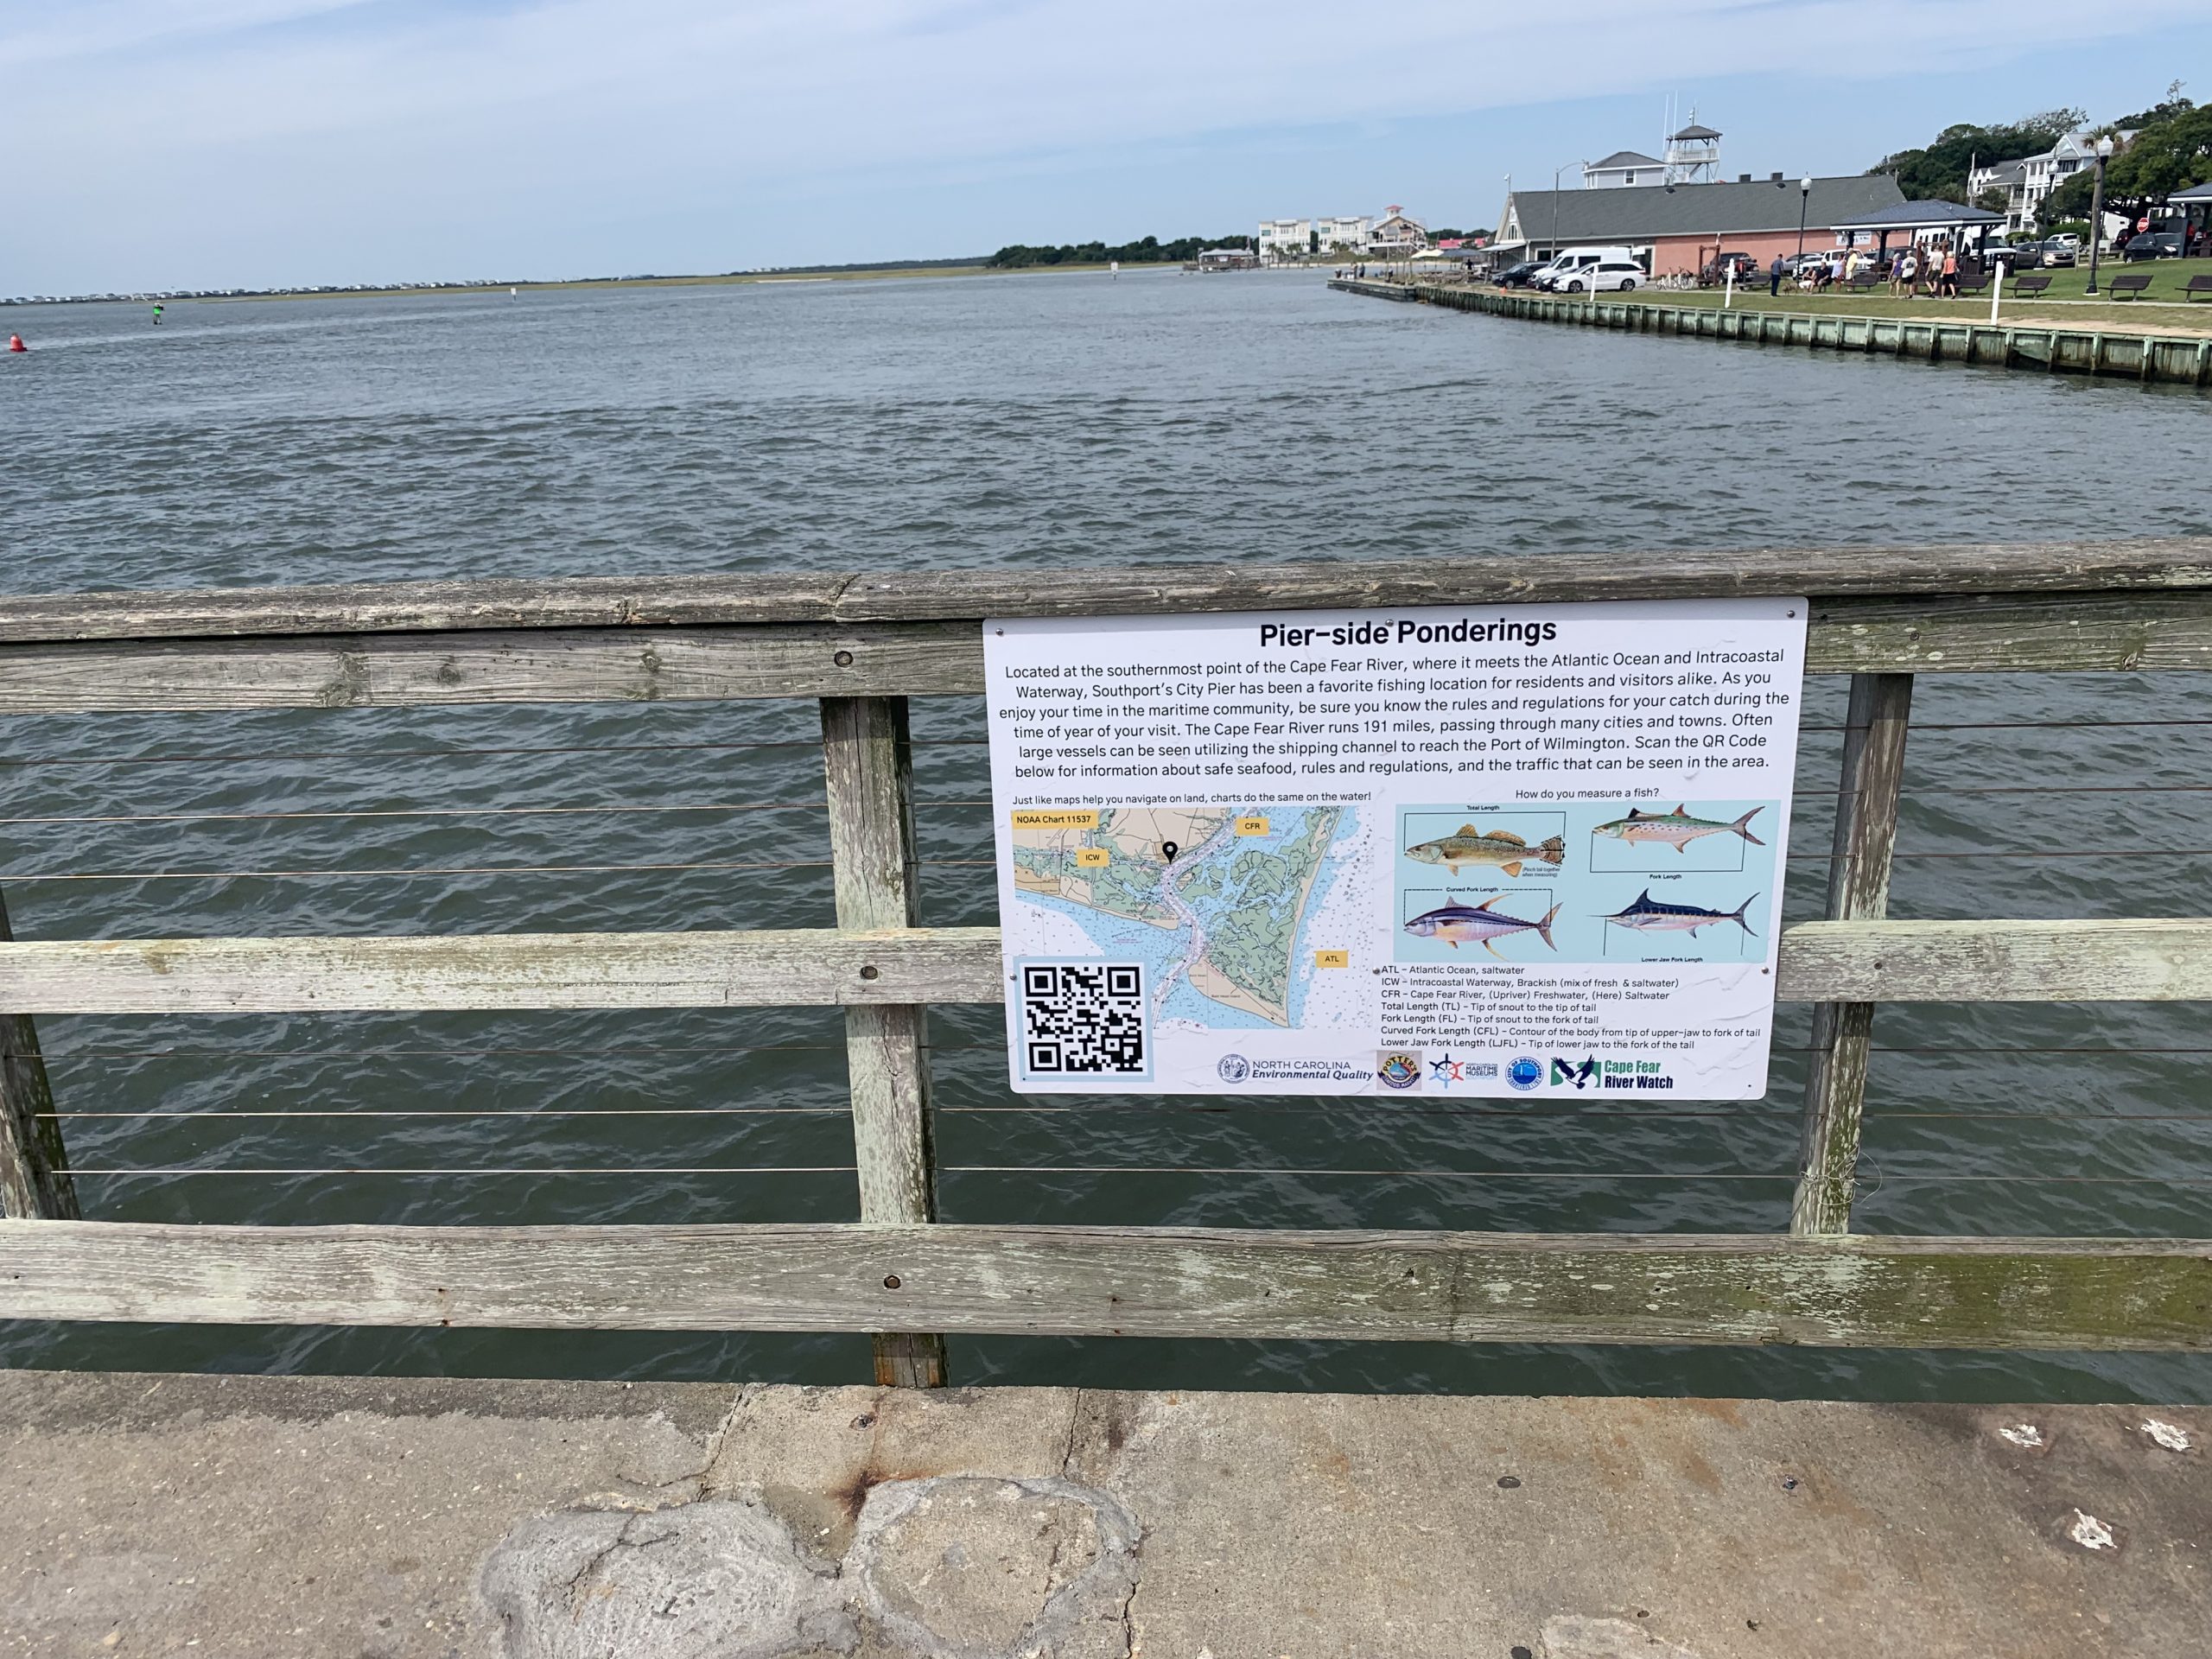 Image Description: White sign containing black font centered at top with image of chart at middle left and image of four fish at middle right. Across bottom is a black and white QR code, logos, and definitions with acronyms. Sign affixed to wooden railings overlooking grey water, bulkheads, and a park in the background